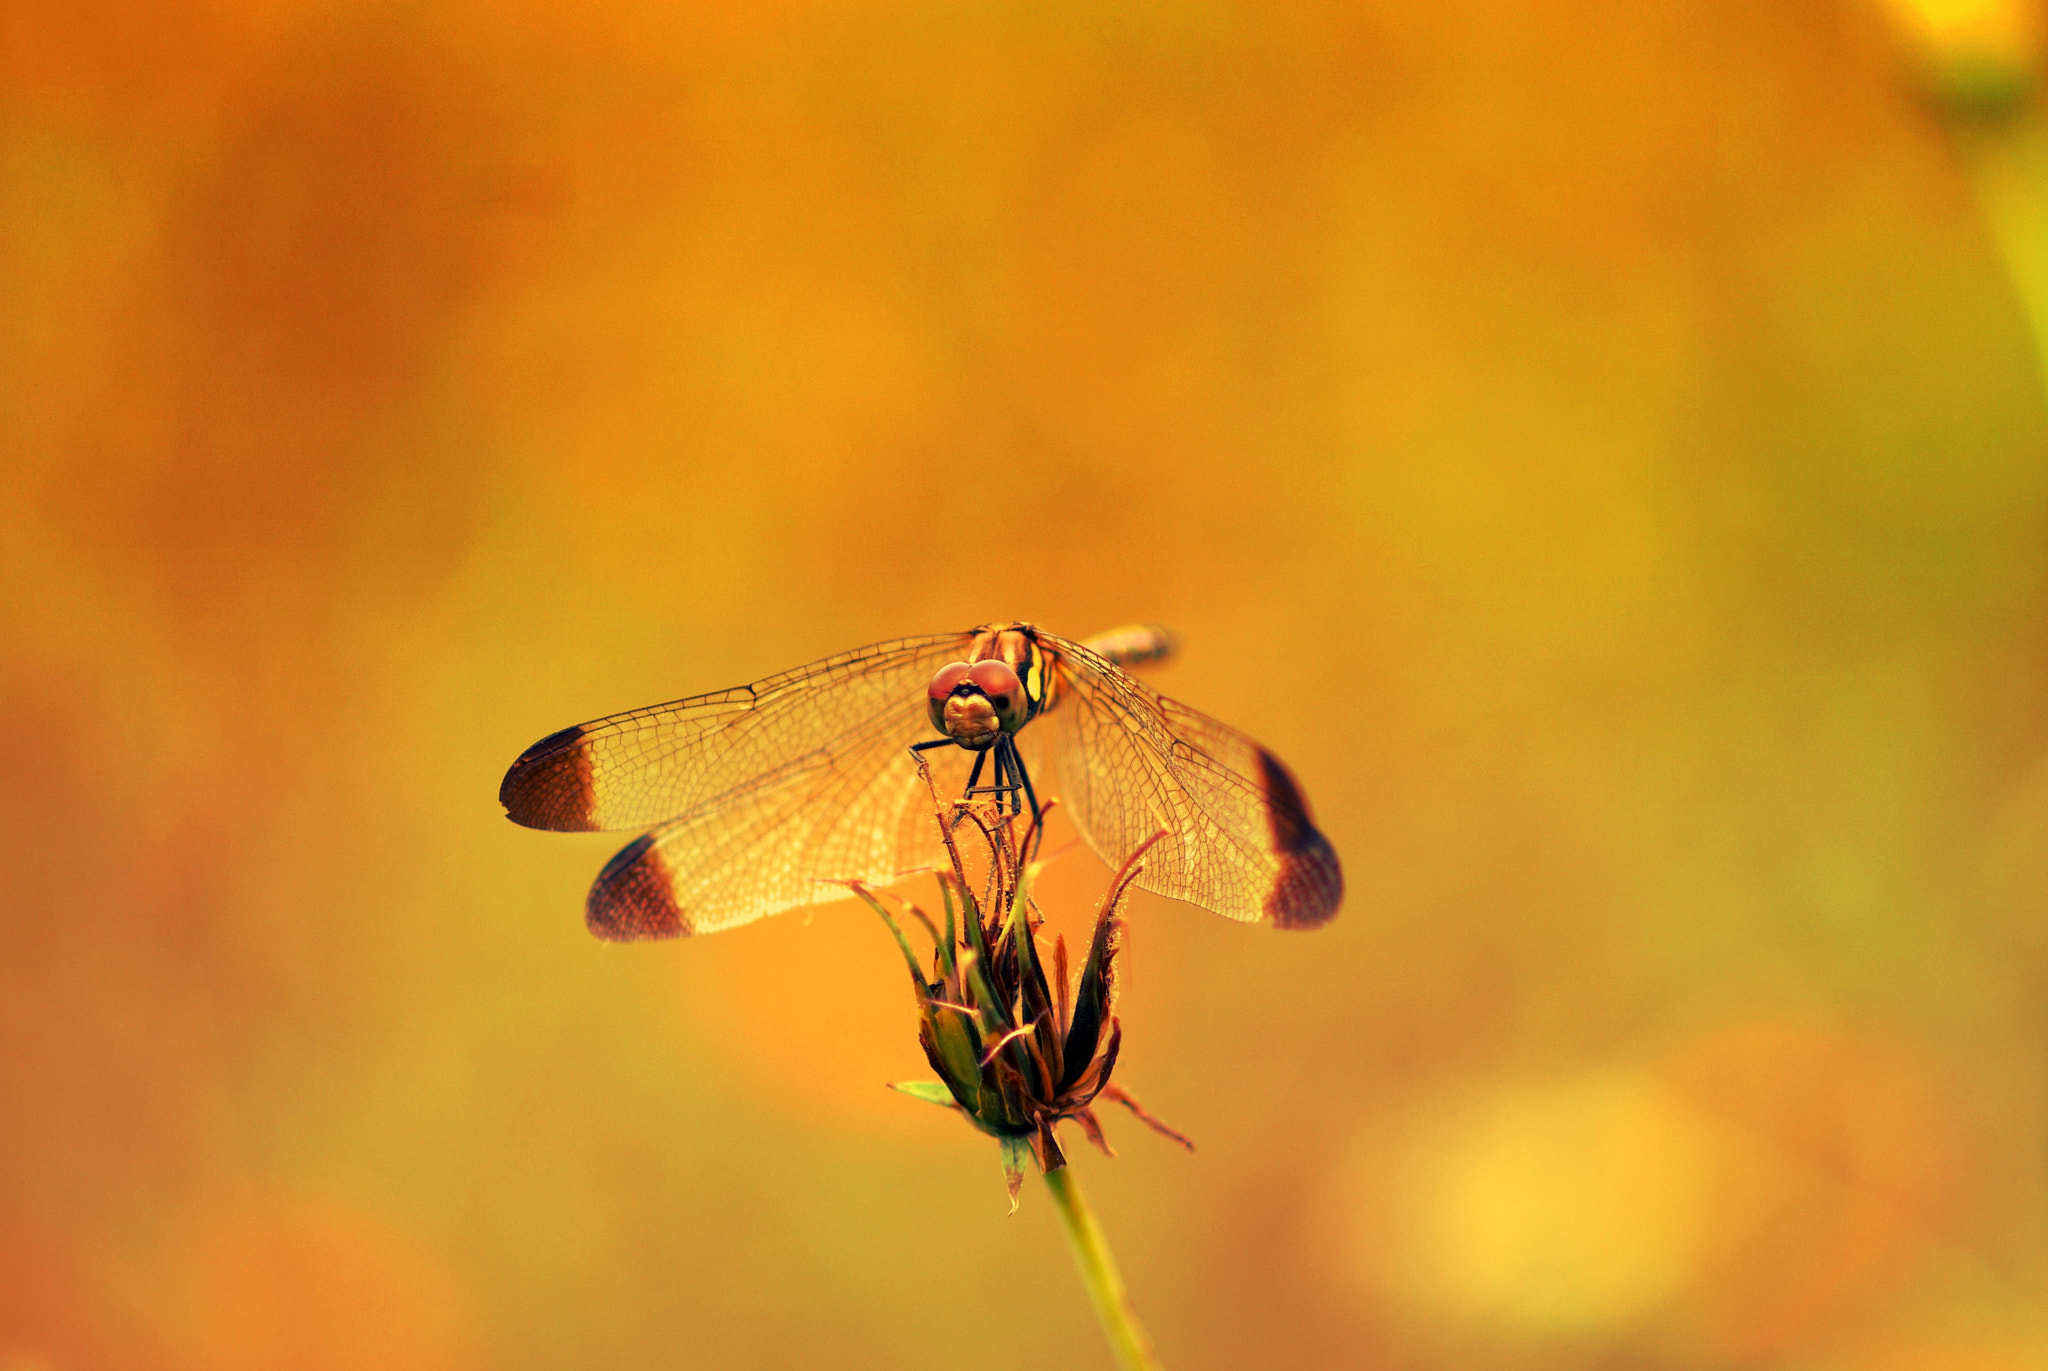 Pentax K10D sample photo. A dragonfly photography